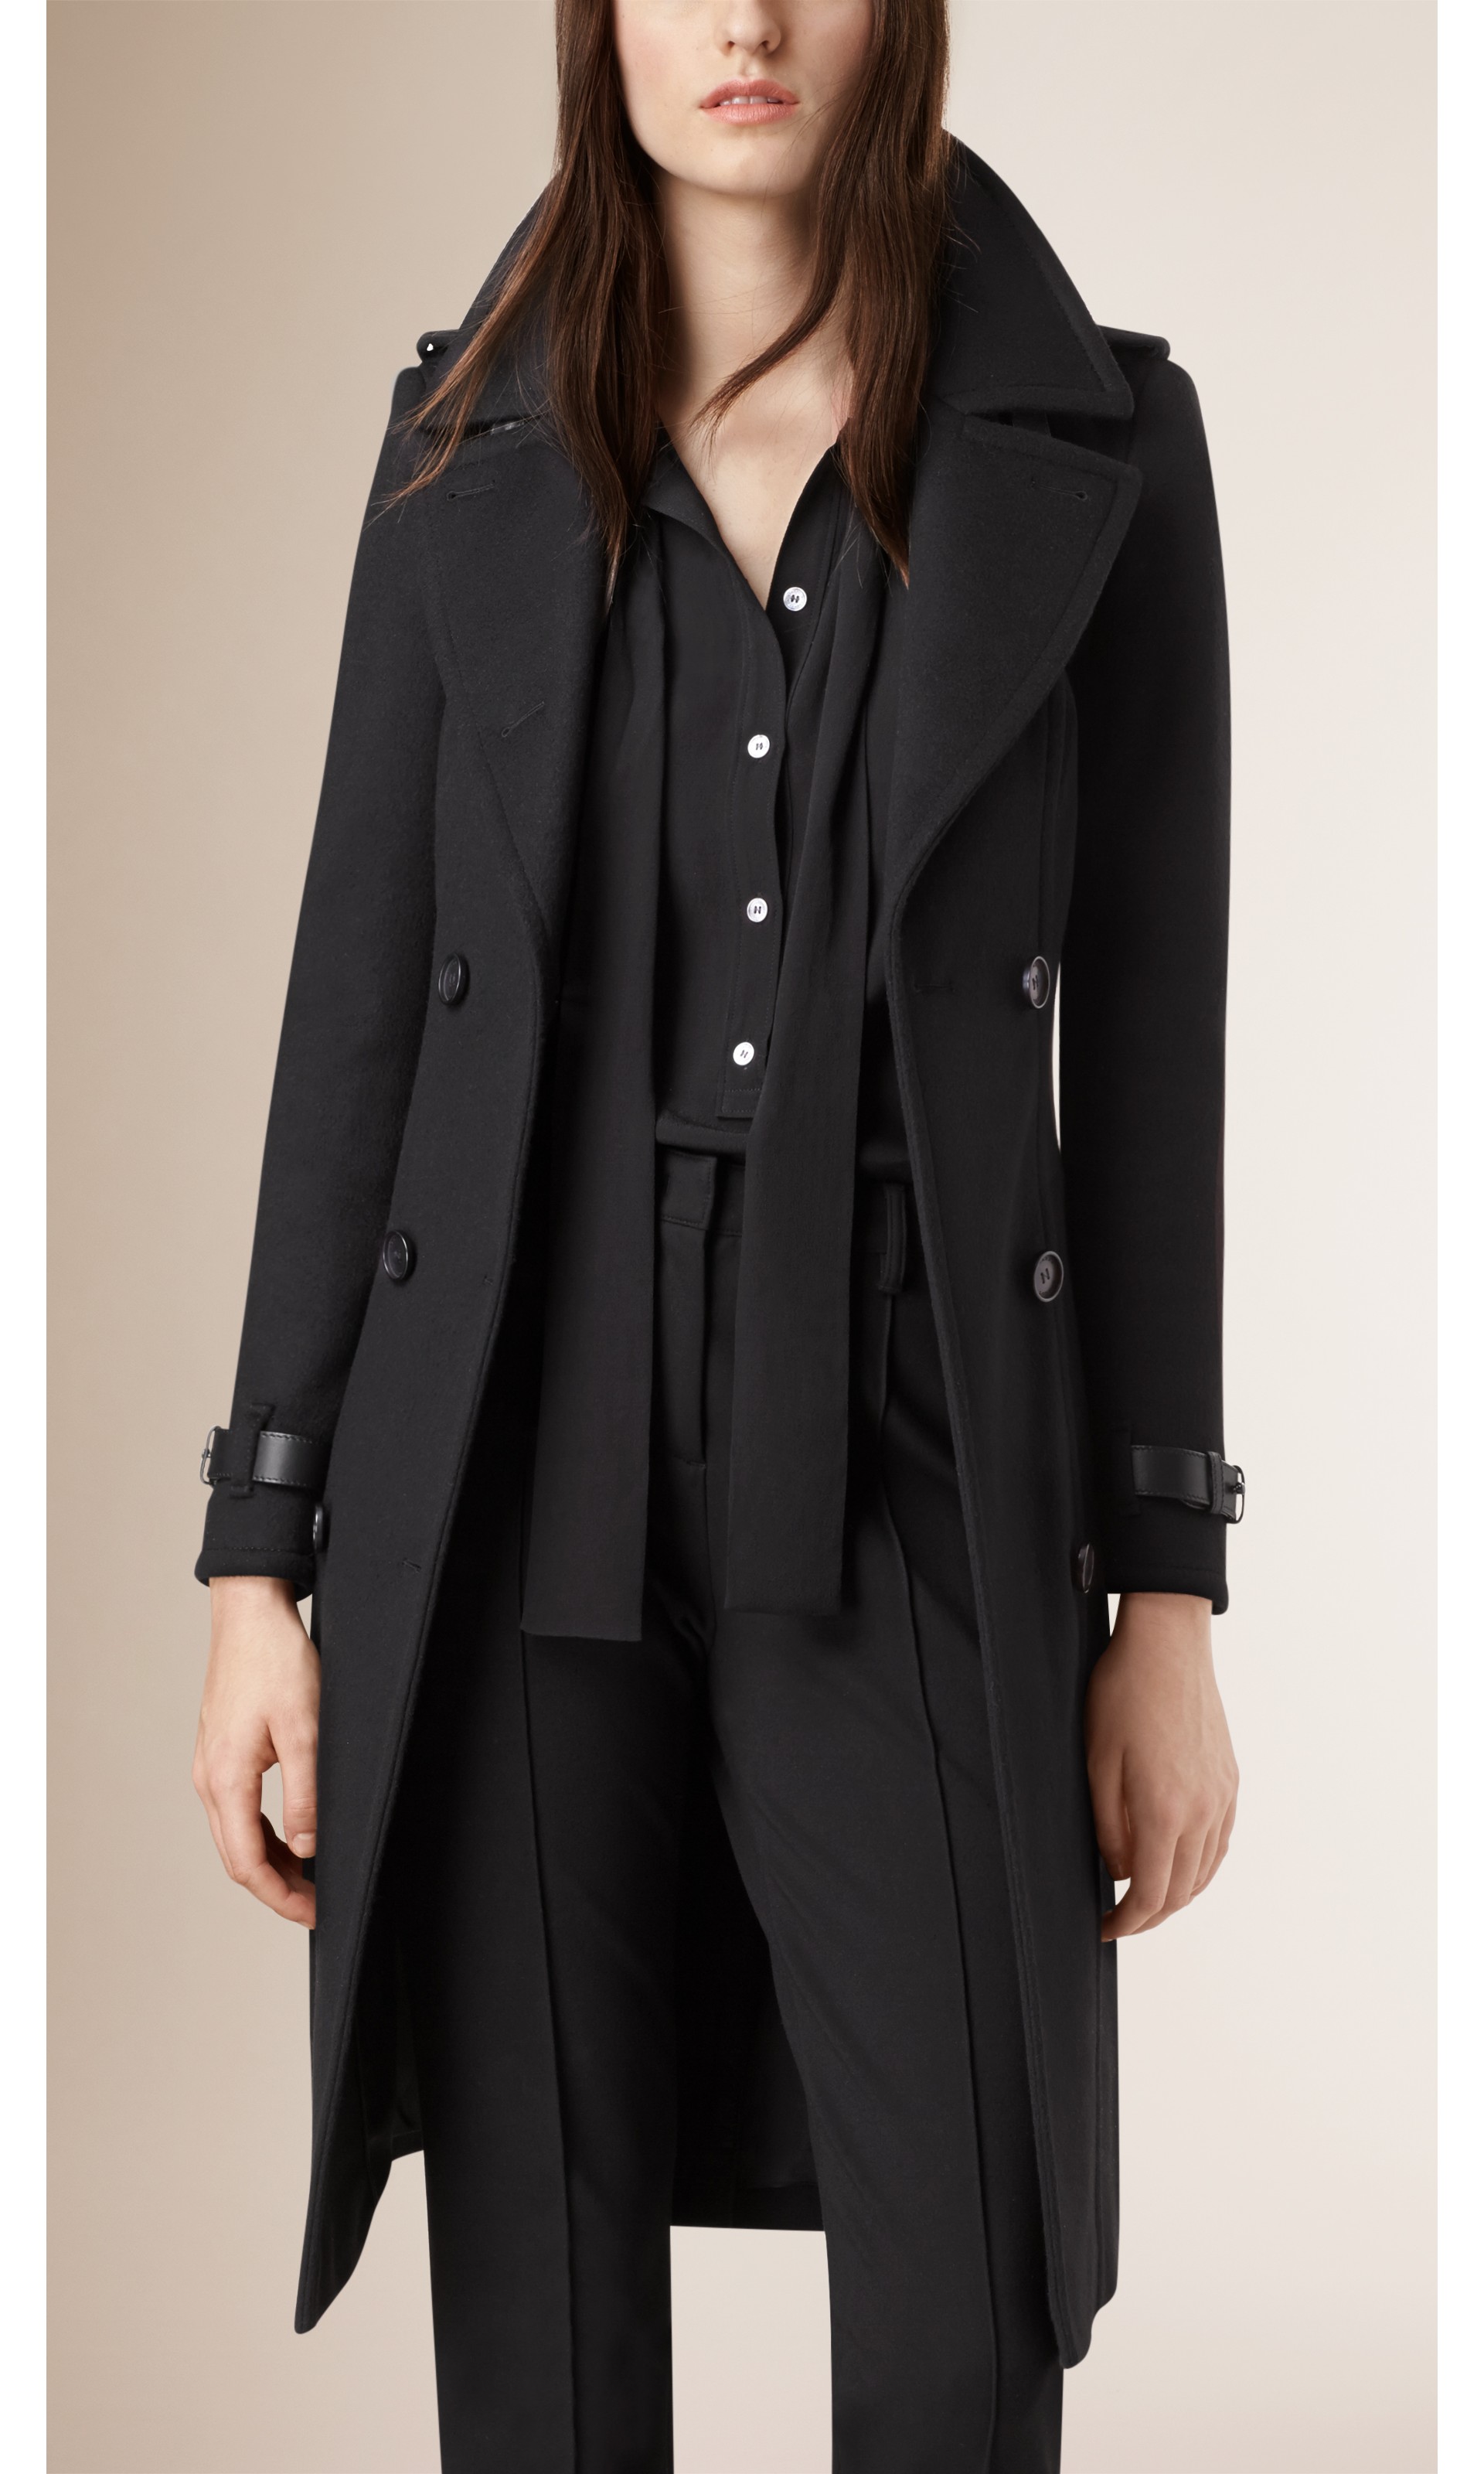 Leather Trim Wool Cashmere Trench Coat in Black - Women | Burberry ...